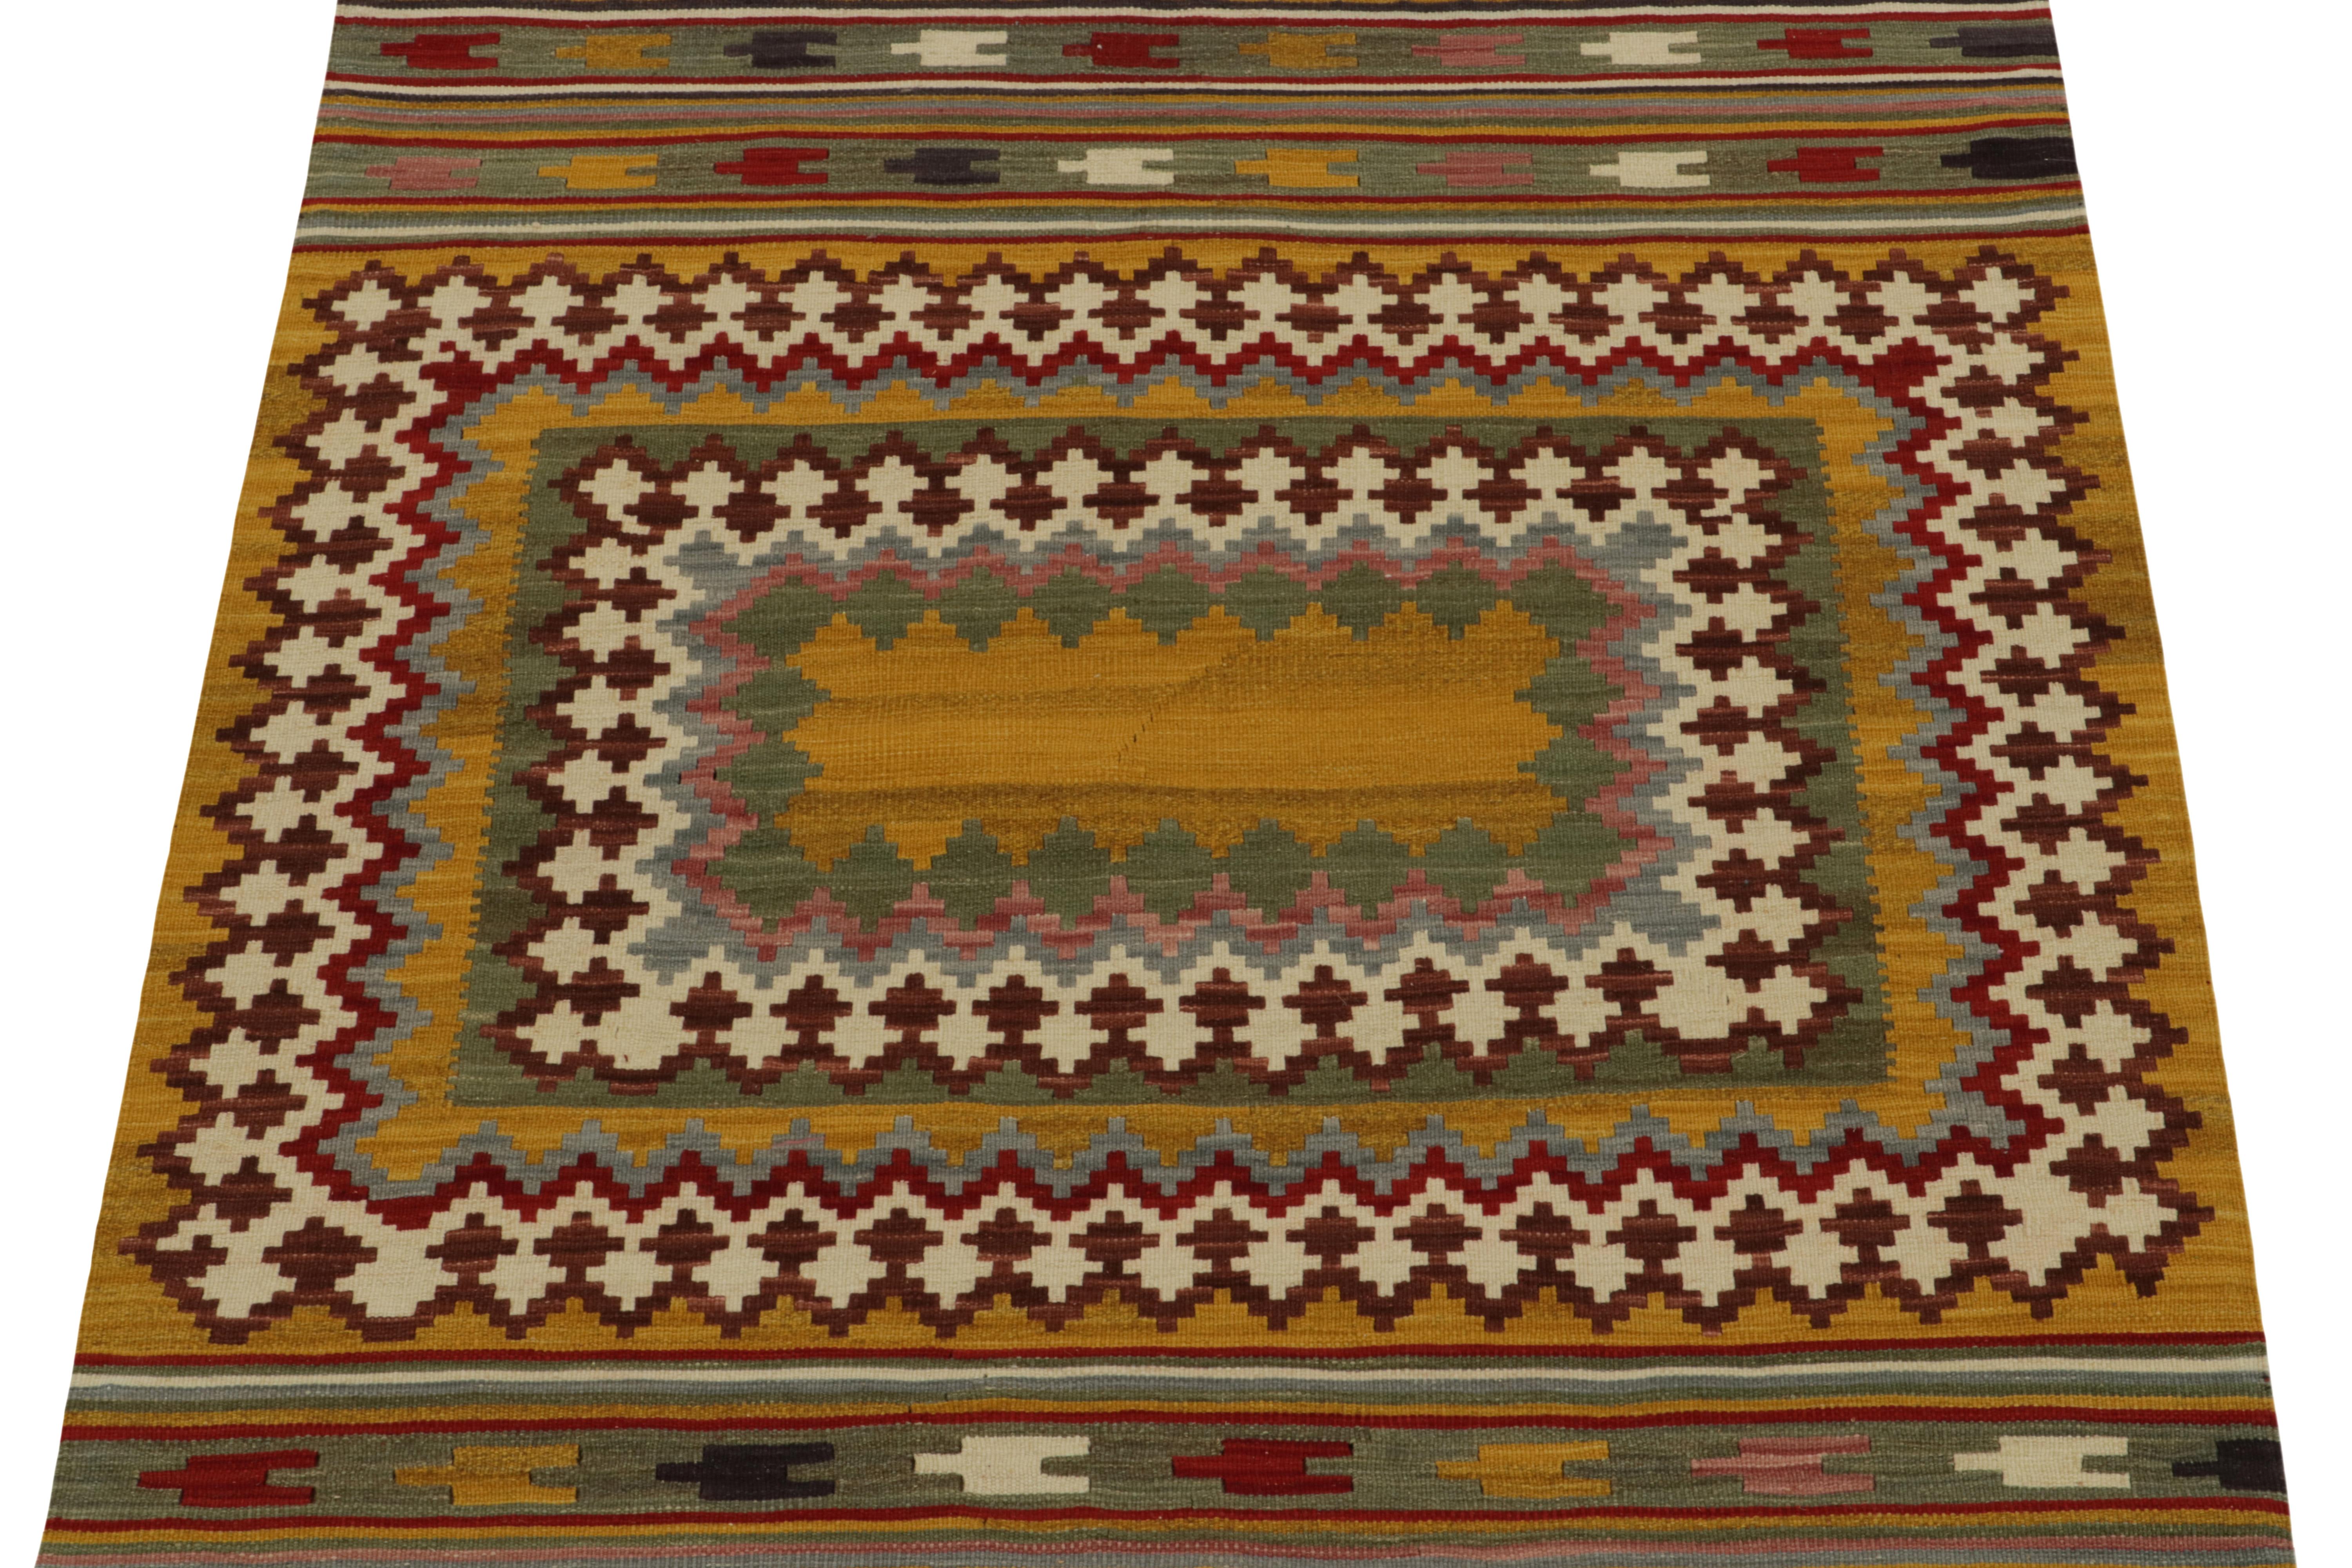 Handwoven in wool circa 1980-1990, a rare vintage curation of small-sized Sofreh Kilim rugs joining our acclaimed collection. Especially distinct in 3x4 size, color, and durability among Persian flat weaves of its time. 

The piece carries a